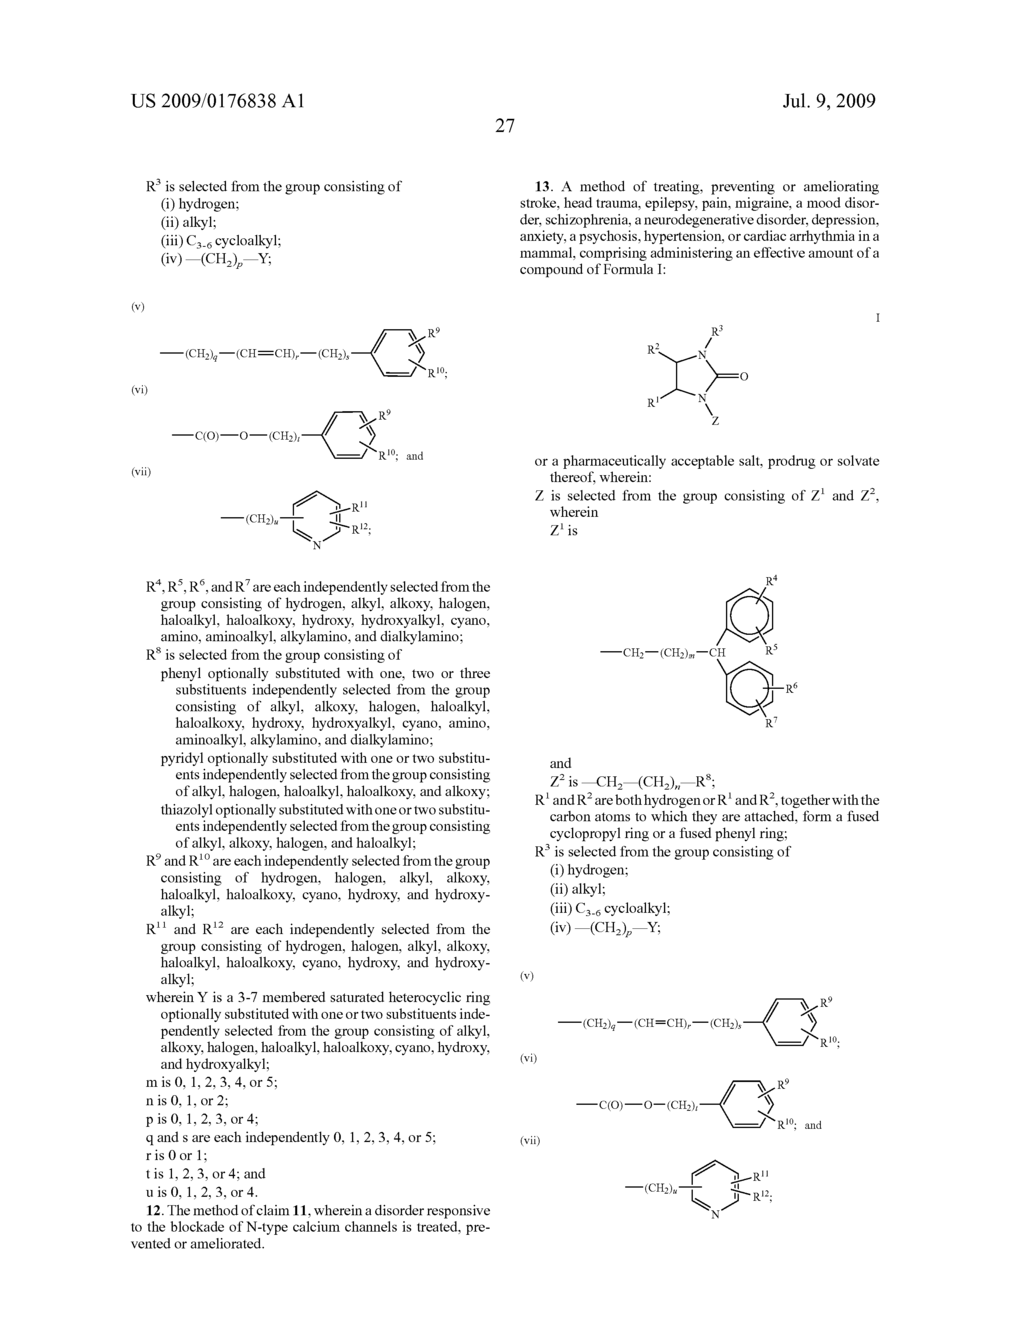 Cyclourea Compounds as Calcium Channel Blockers - diagram, schematic, and image 28